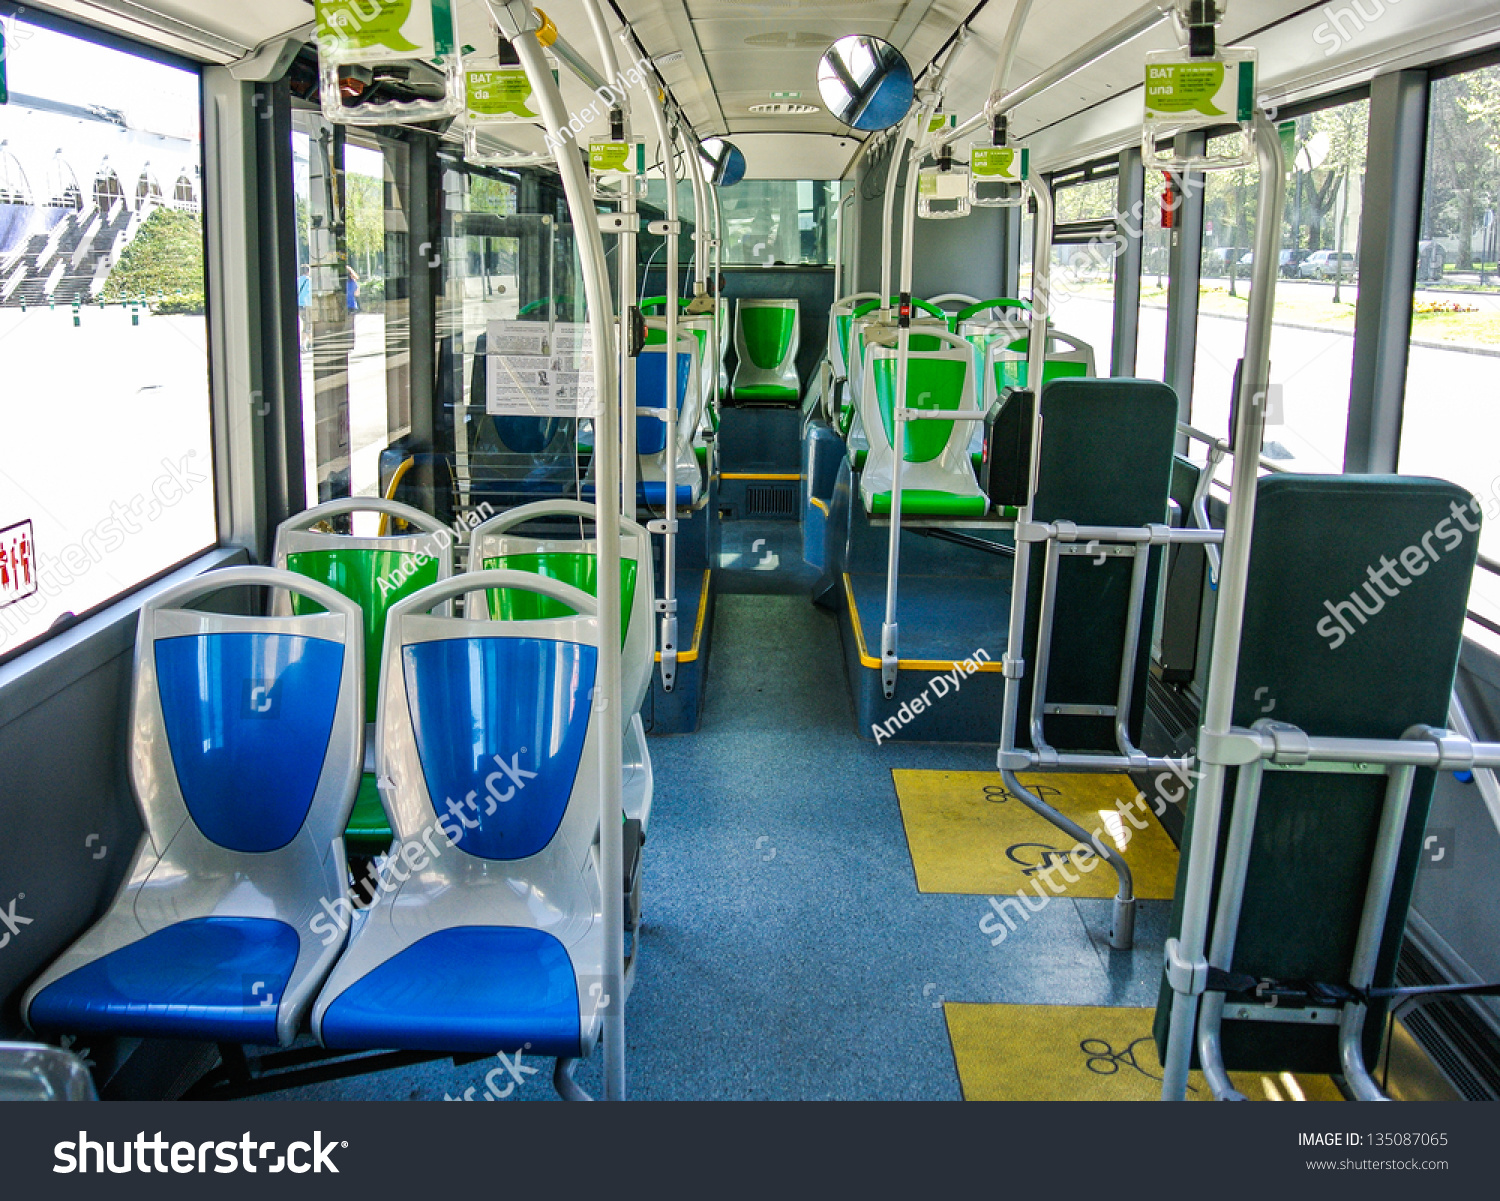 stock-photo-seats-of-an-articulated-bus-in-spain-135087065.jpg